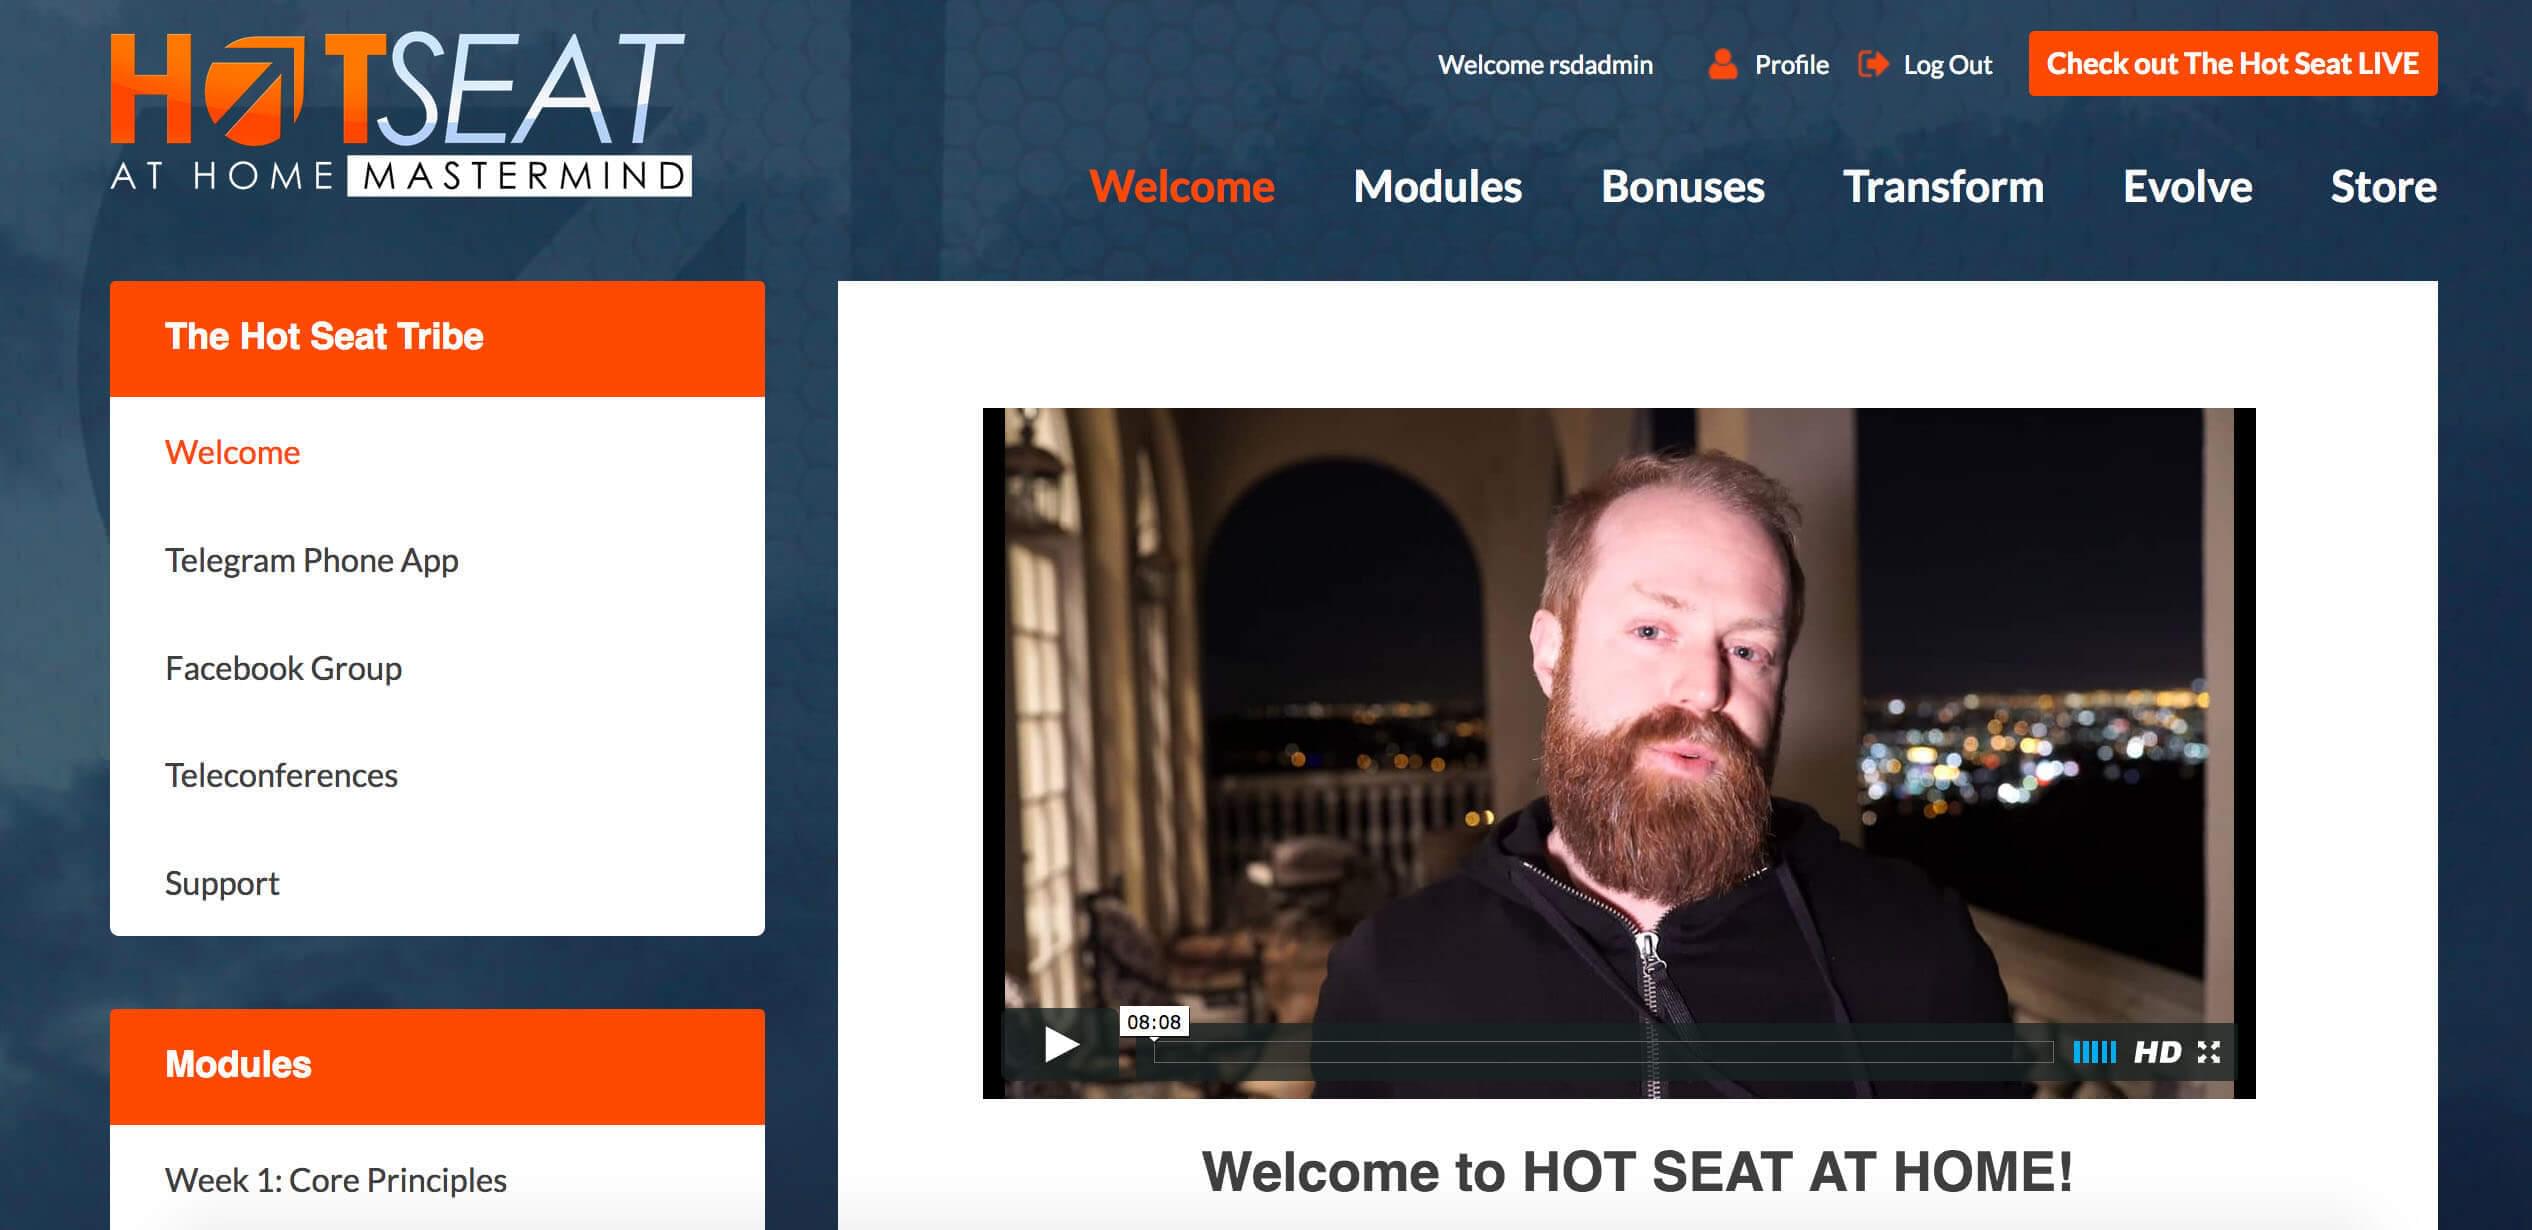 rsd hotseat at home mastermind edition download